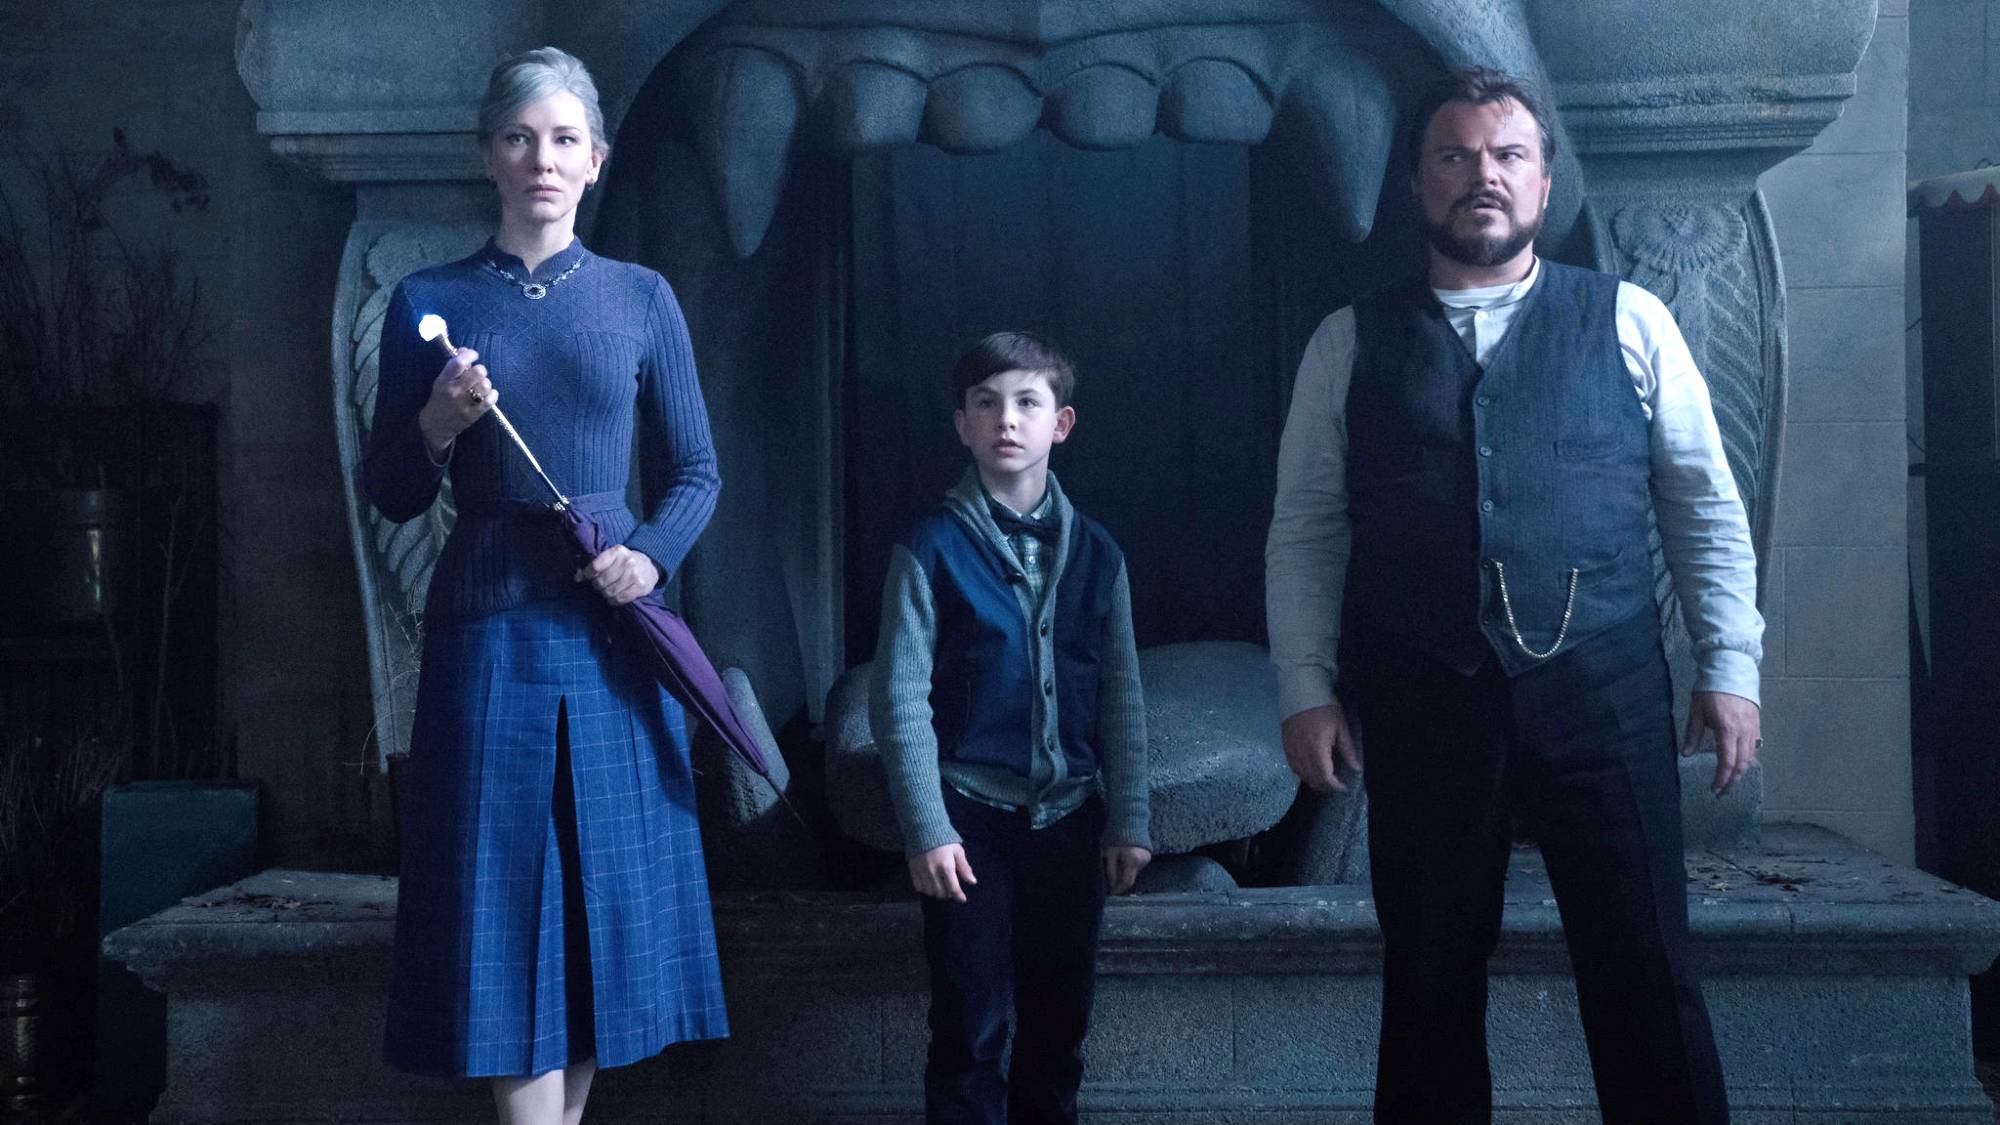 Cate Blanchett, Owen Vaccaro and Jack Black in The House with a Clock in Its Walls